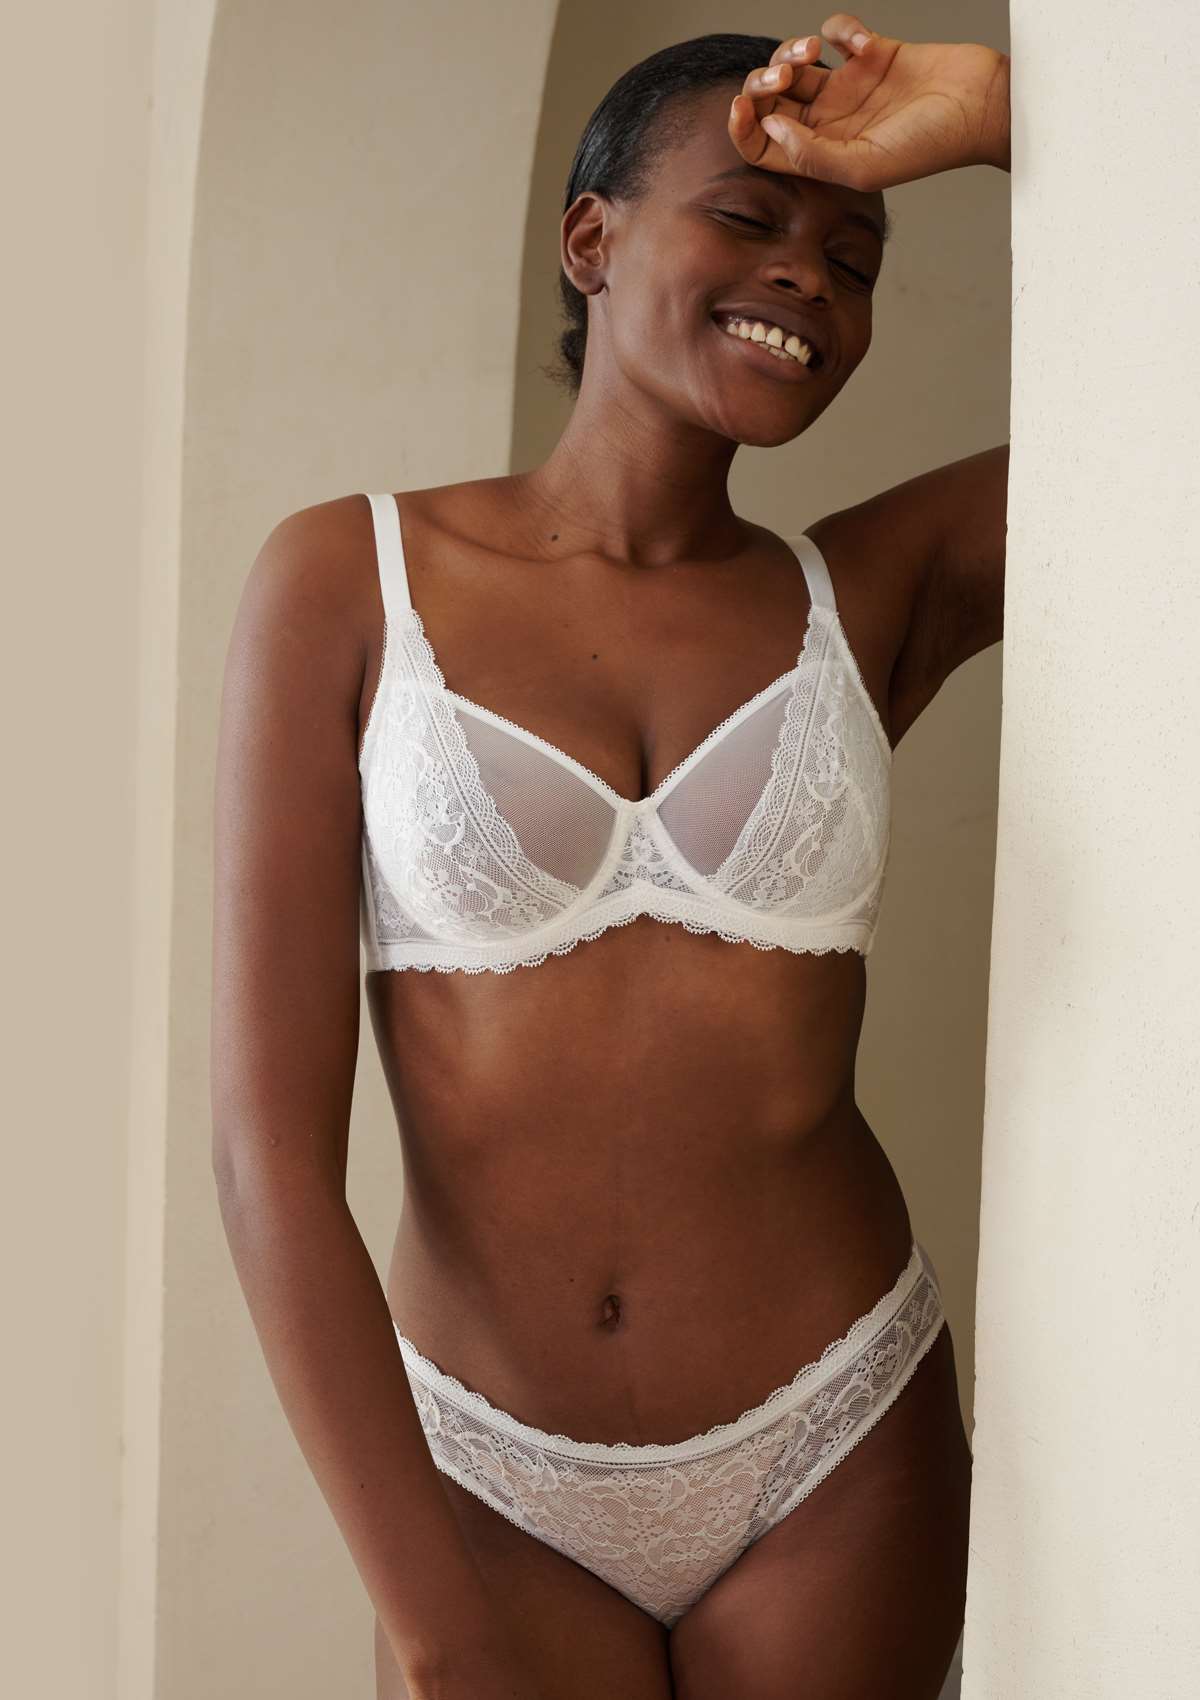 HSIA Anemone Big Bra: Best Bra For Lift And Support, Floral Bra - White / 40 / DDD/F